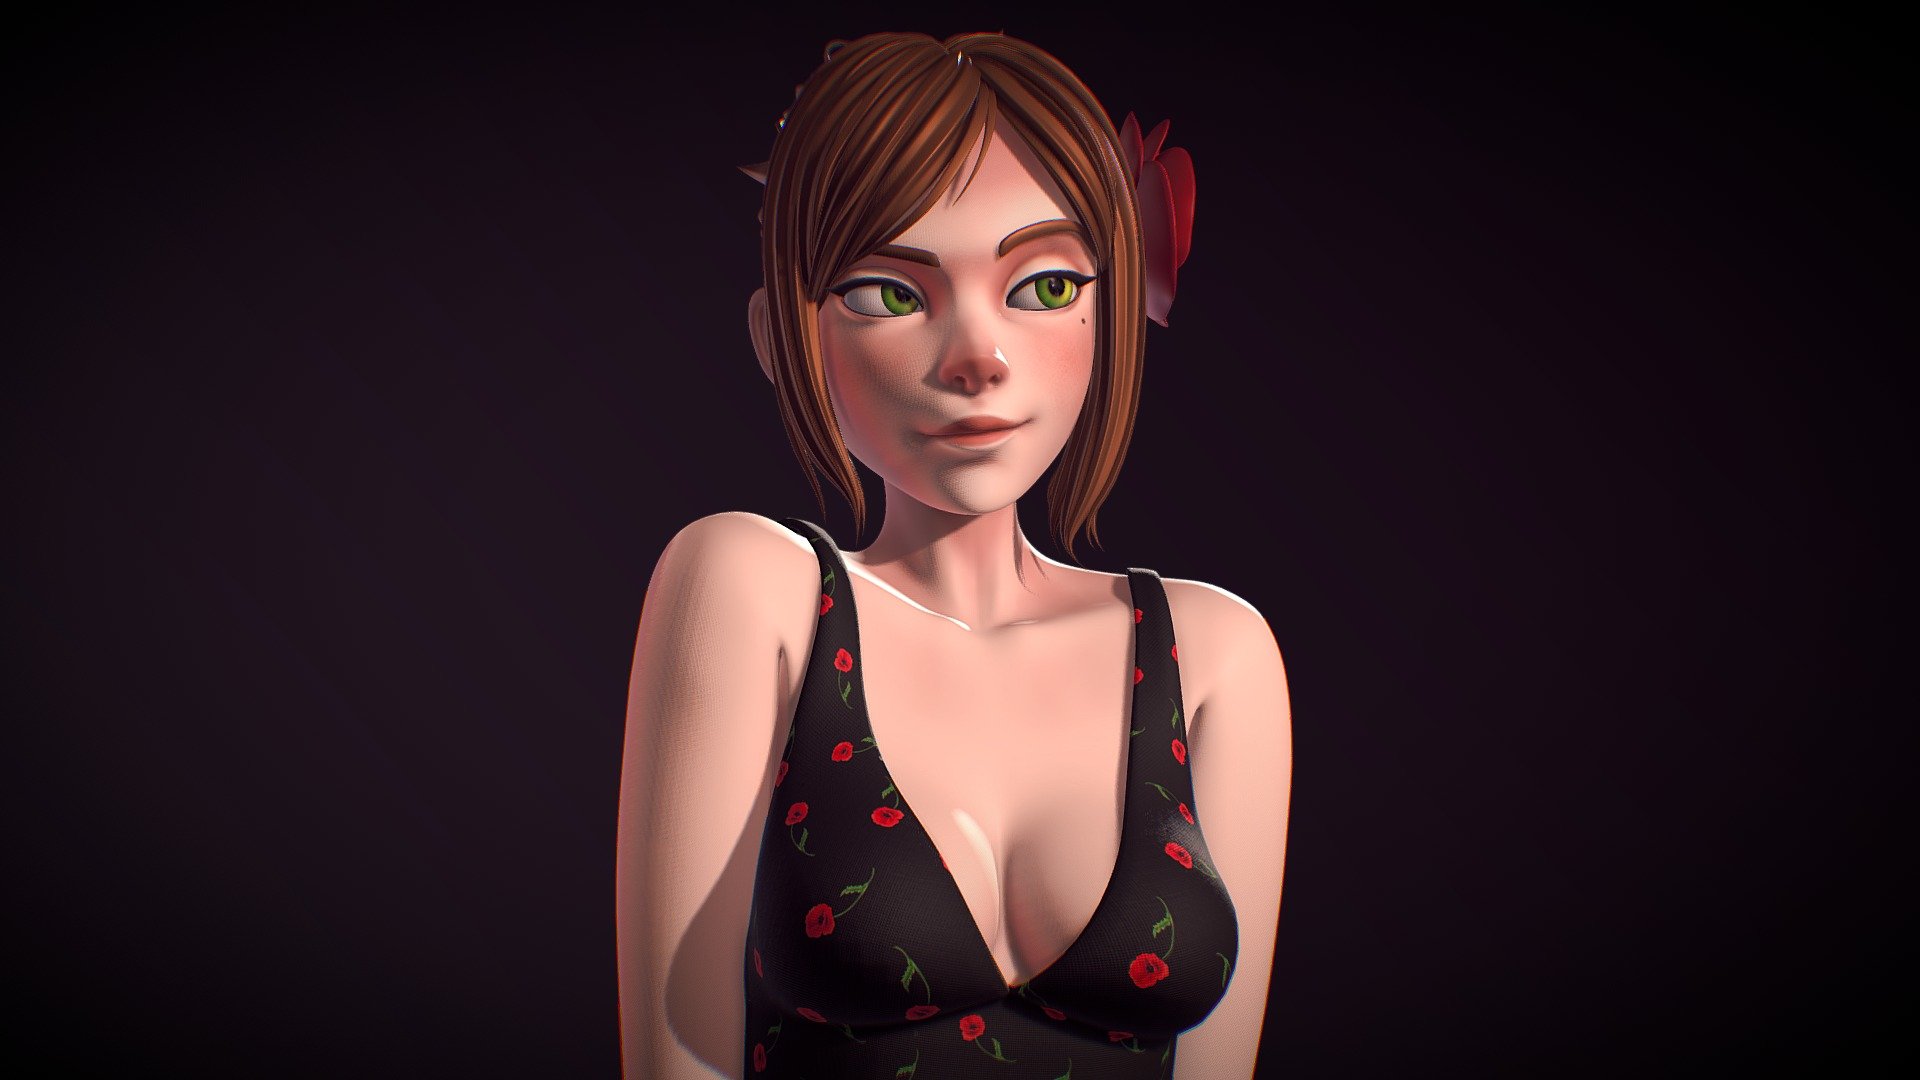 A 3d portrait of character from my unreleased game, designed by me. Made with Blender.

You can also see renders at my artstation: https://www.artstation.com/artwork/6bXXz0 - GWEN - 3D model by otnot (@cyzbich) 3d model